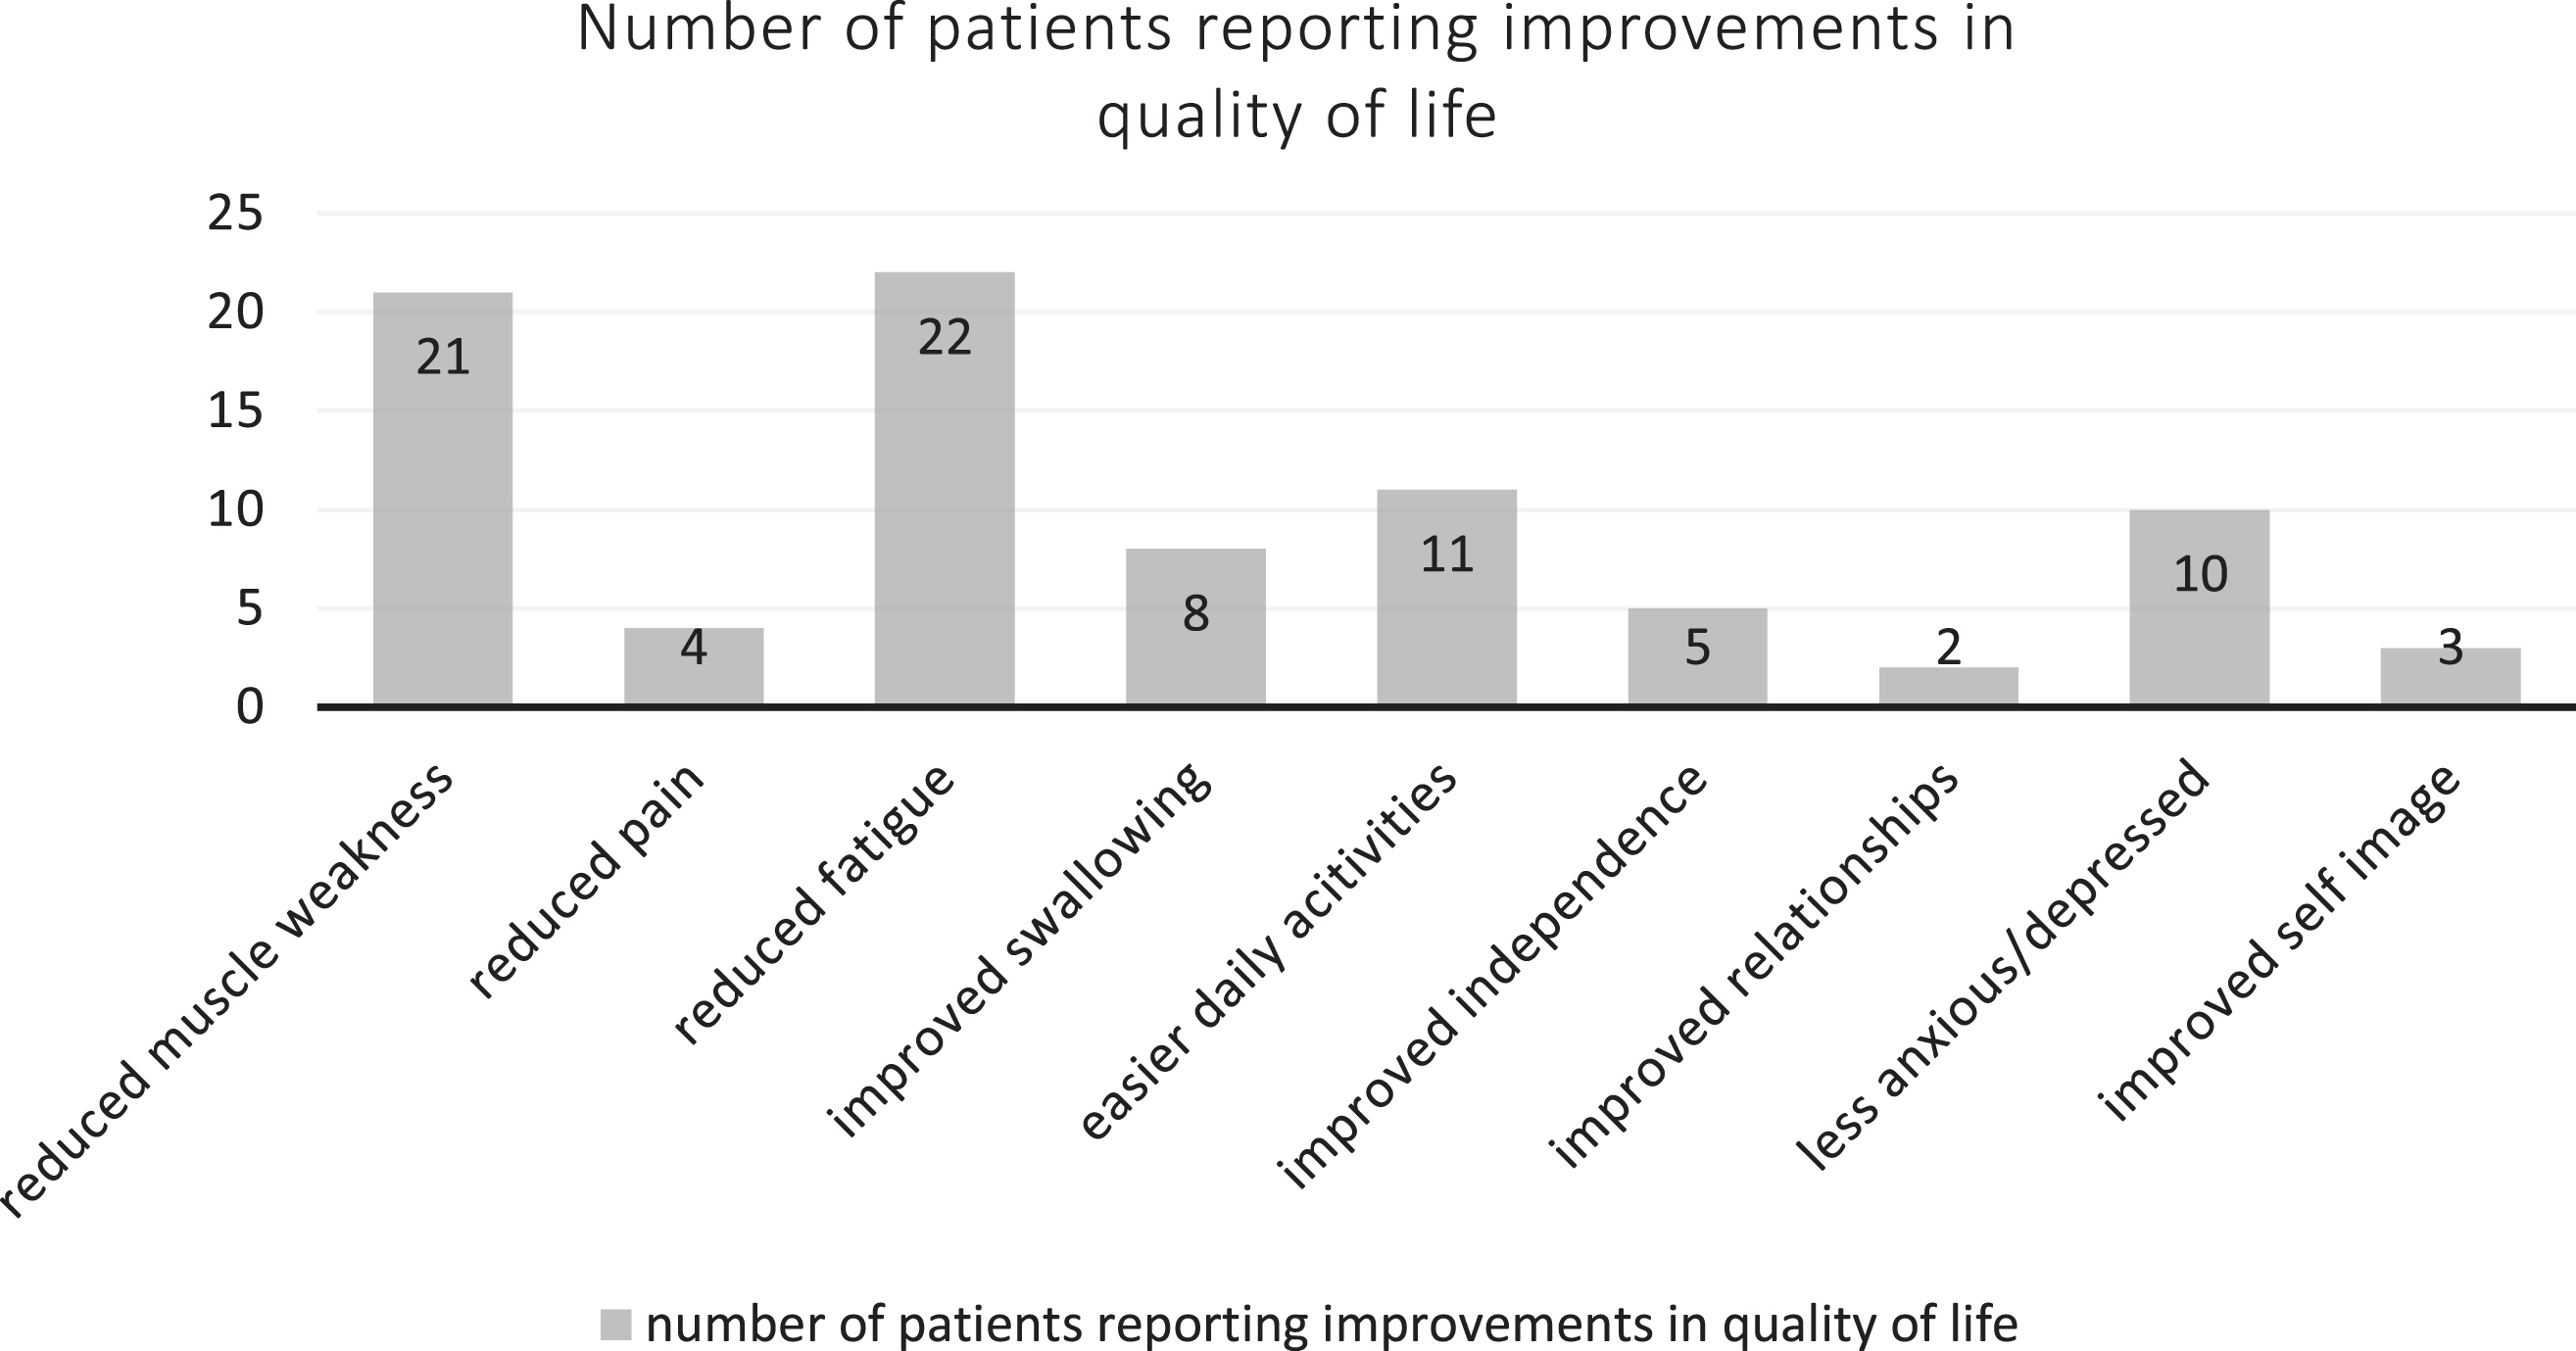 Patient reported quality of life improvements after treatment.